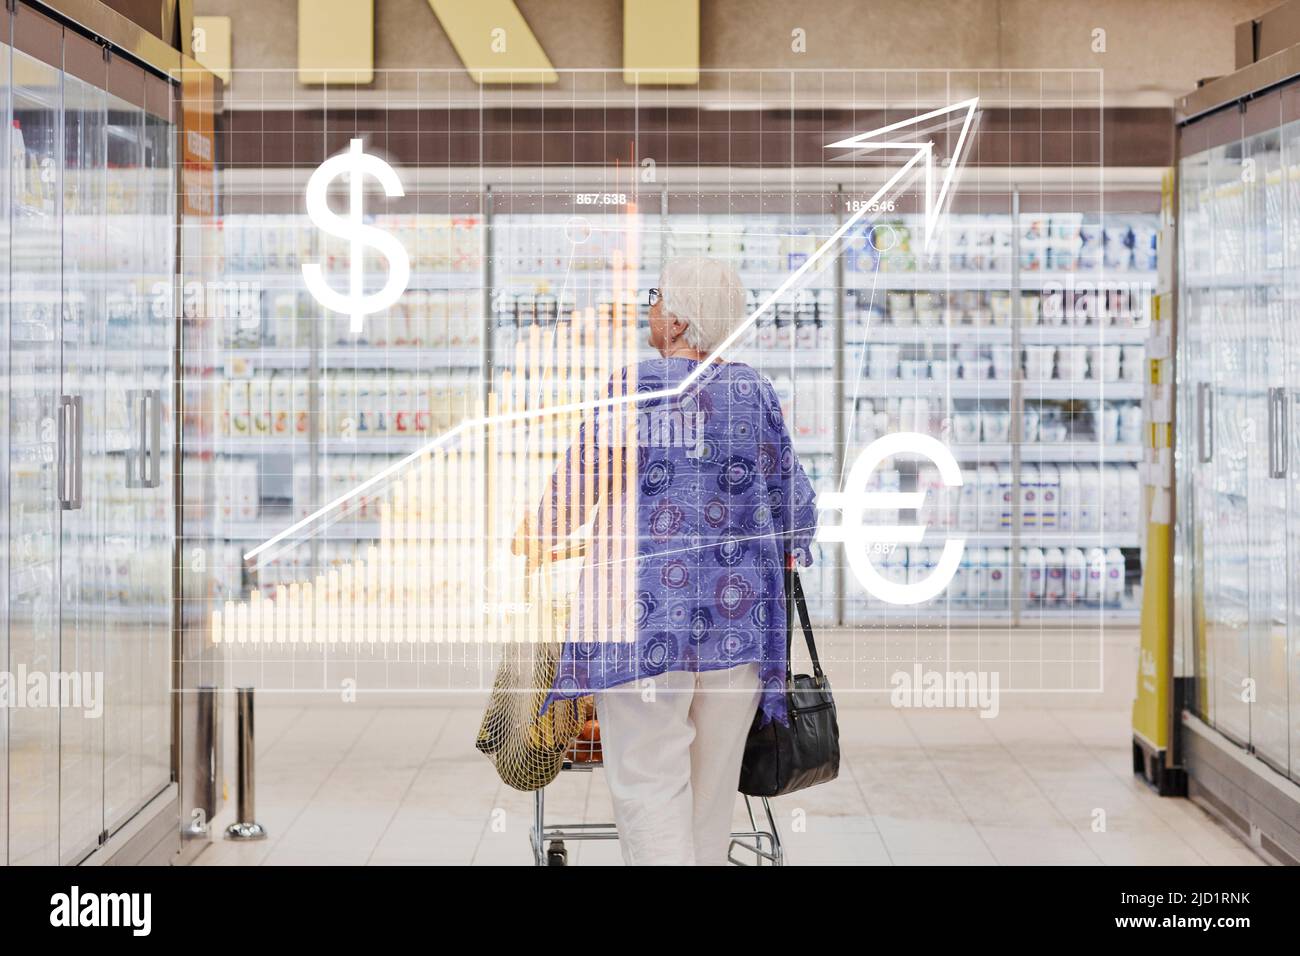 Financial chart and senior woman shopping in supermarket Stock Photo